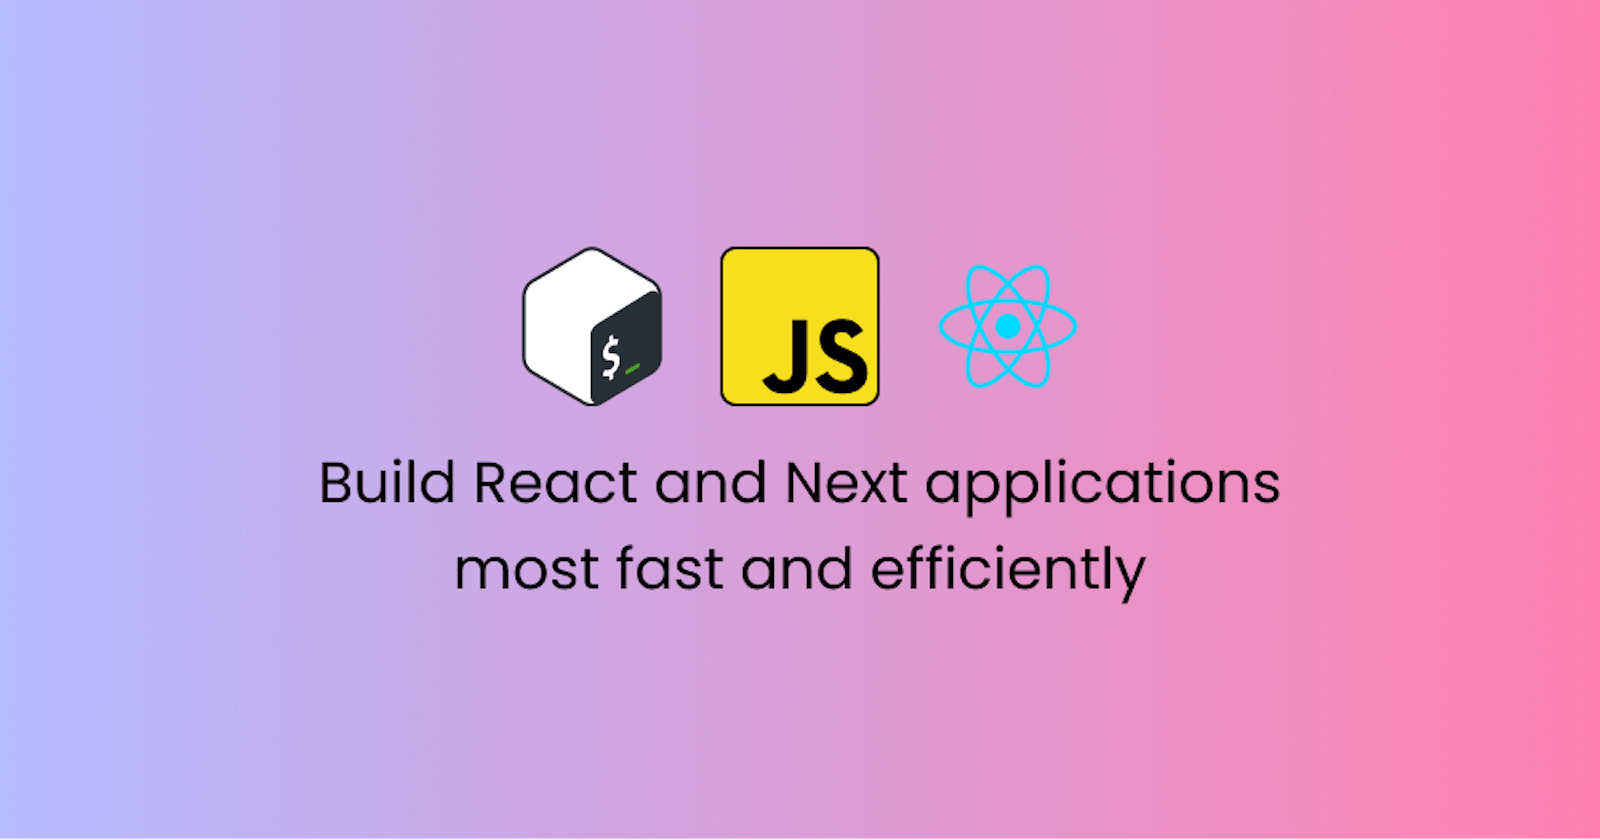 Build React and Next applications most fast and efficiently